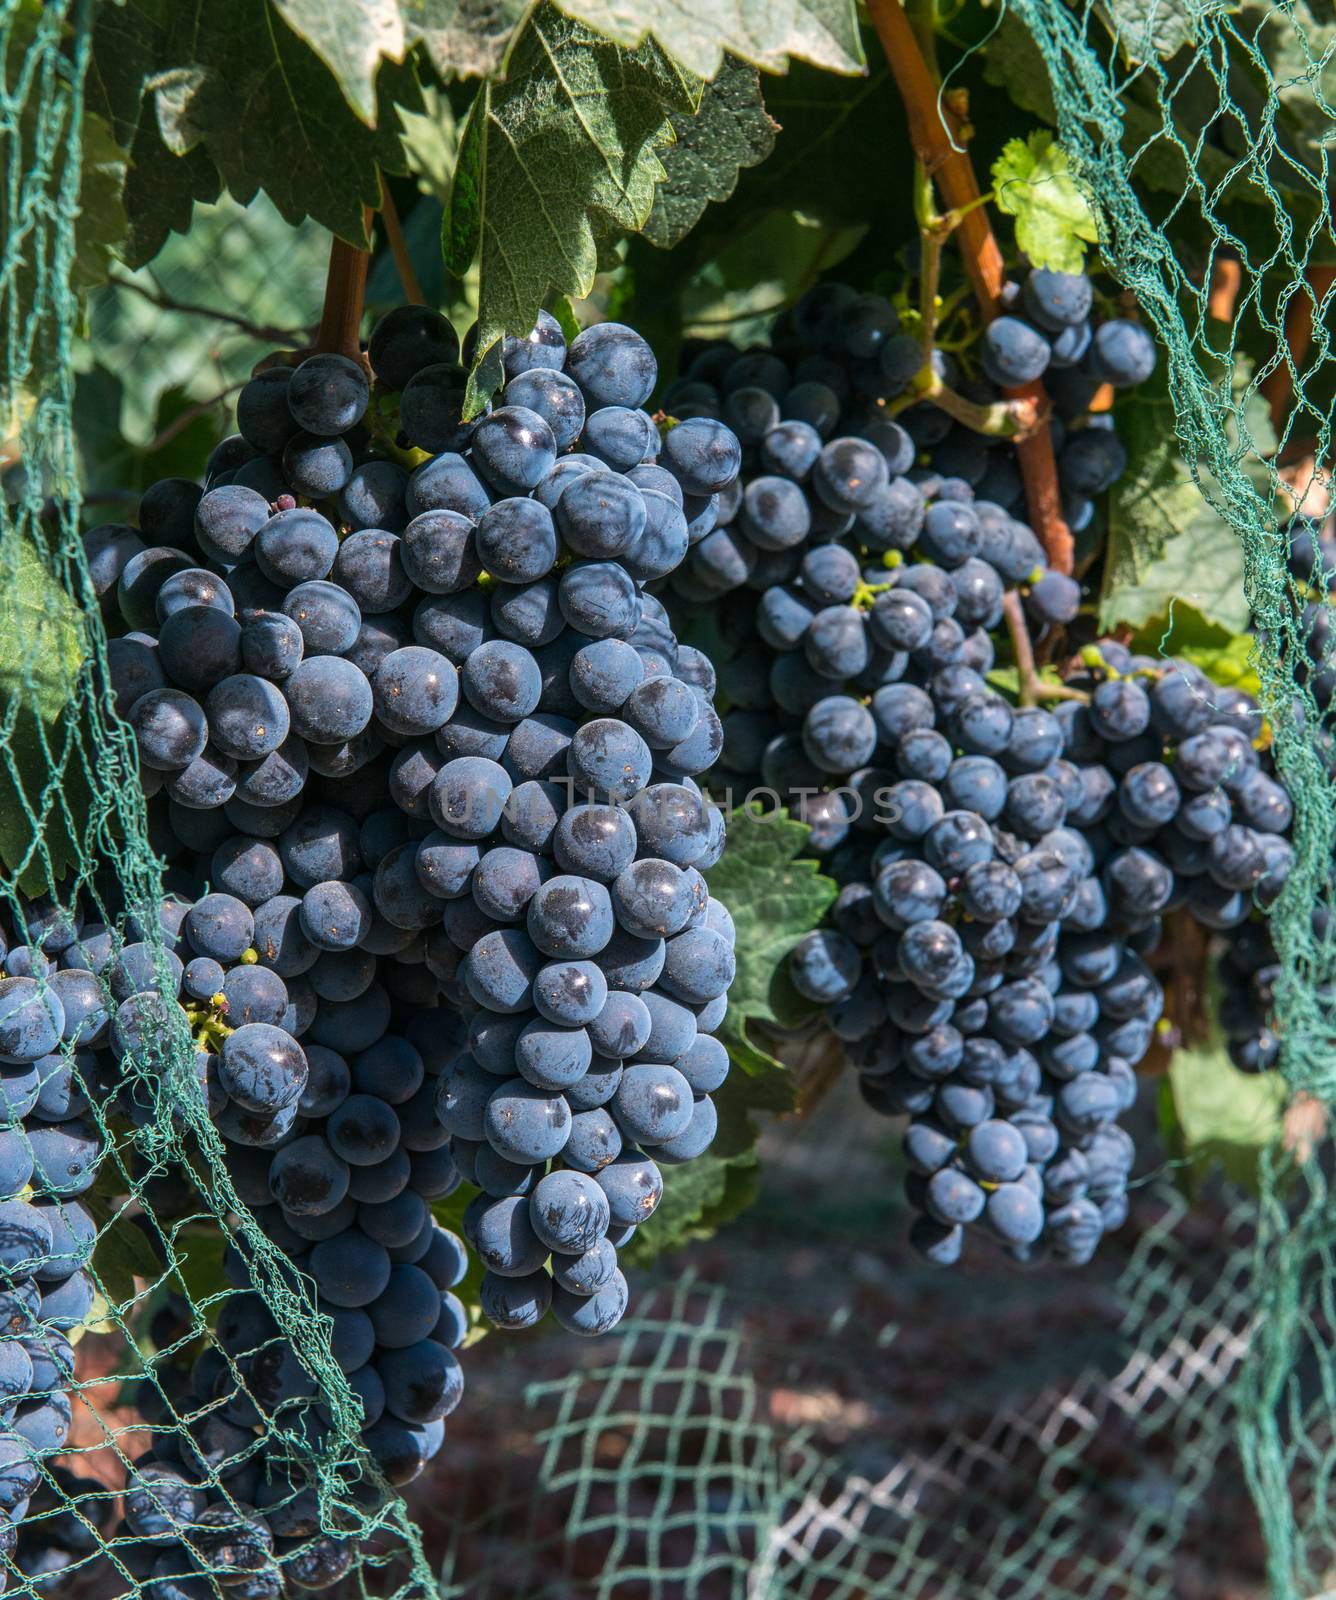 Bunches of purple grapes on the vine in Solvang, California